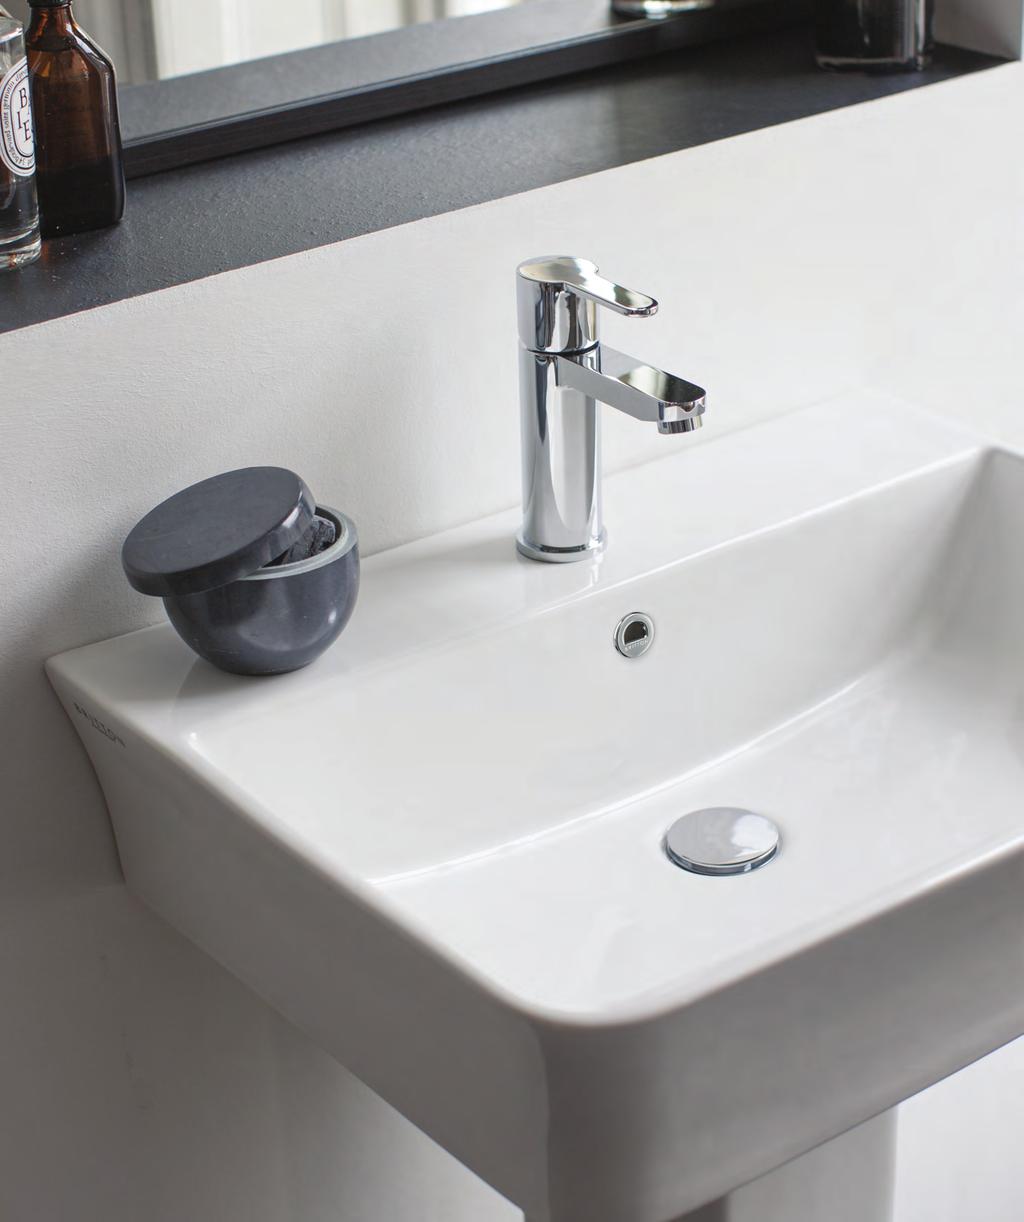 The height and stance works perfectly with close coupled WCs, available with cisterns with lids, or as a single piece of ceramic.